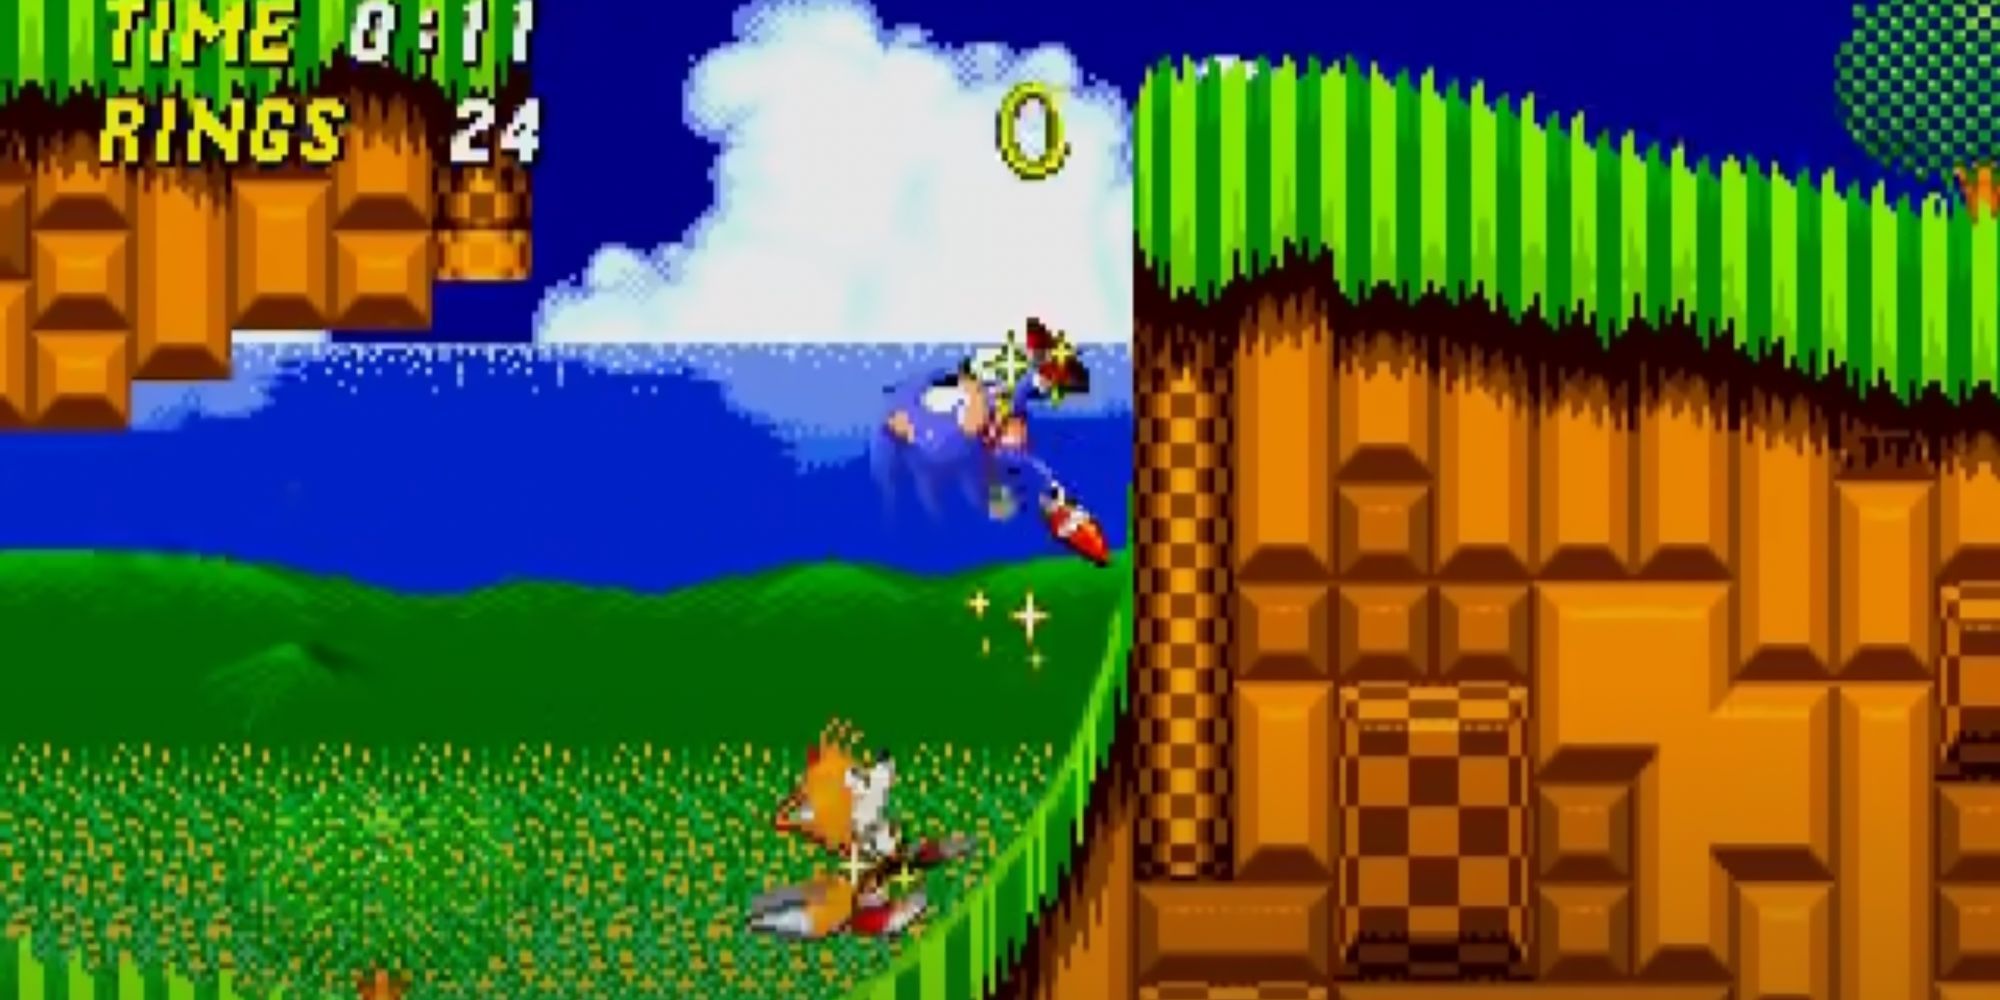 Sonic and Tails running up a steep hill in Sonic the Hedgehog 2